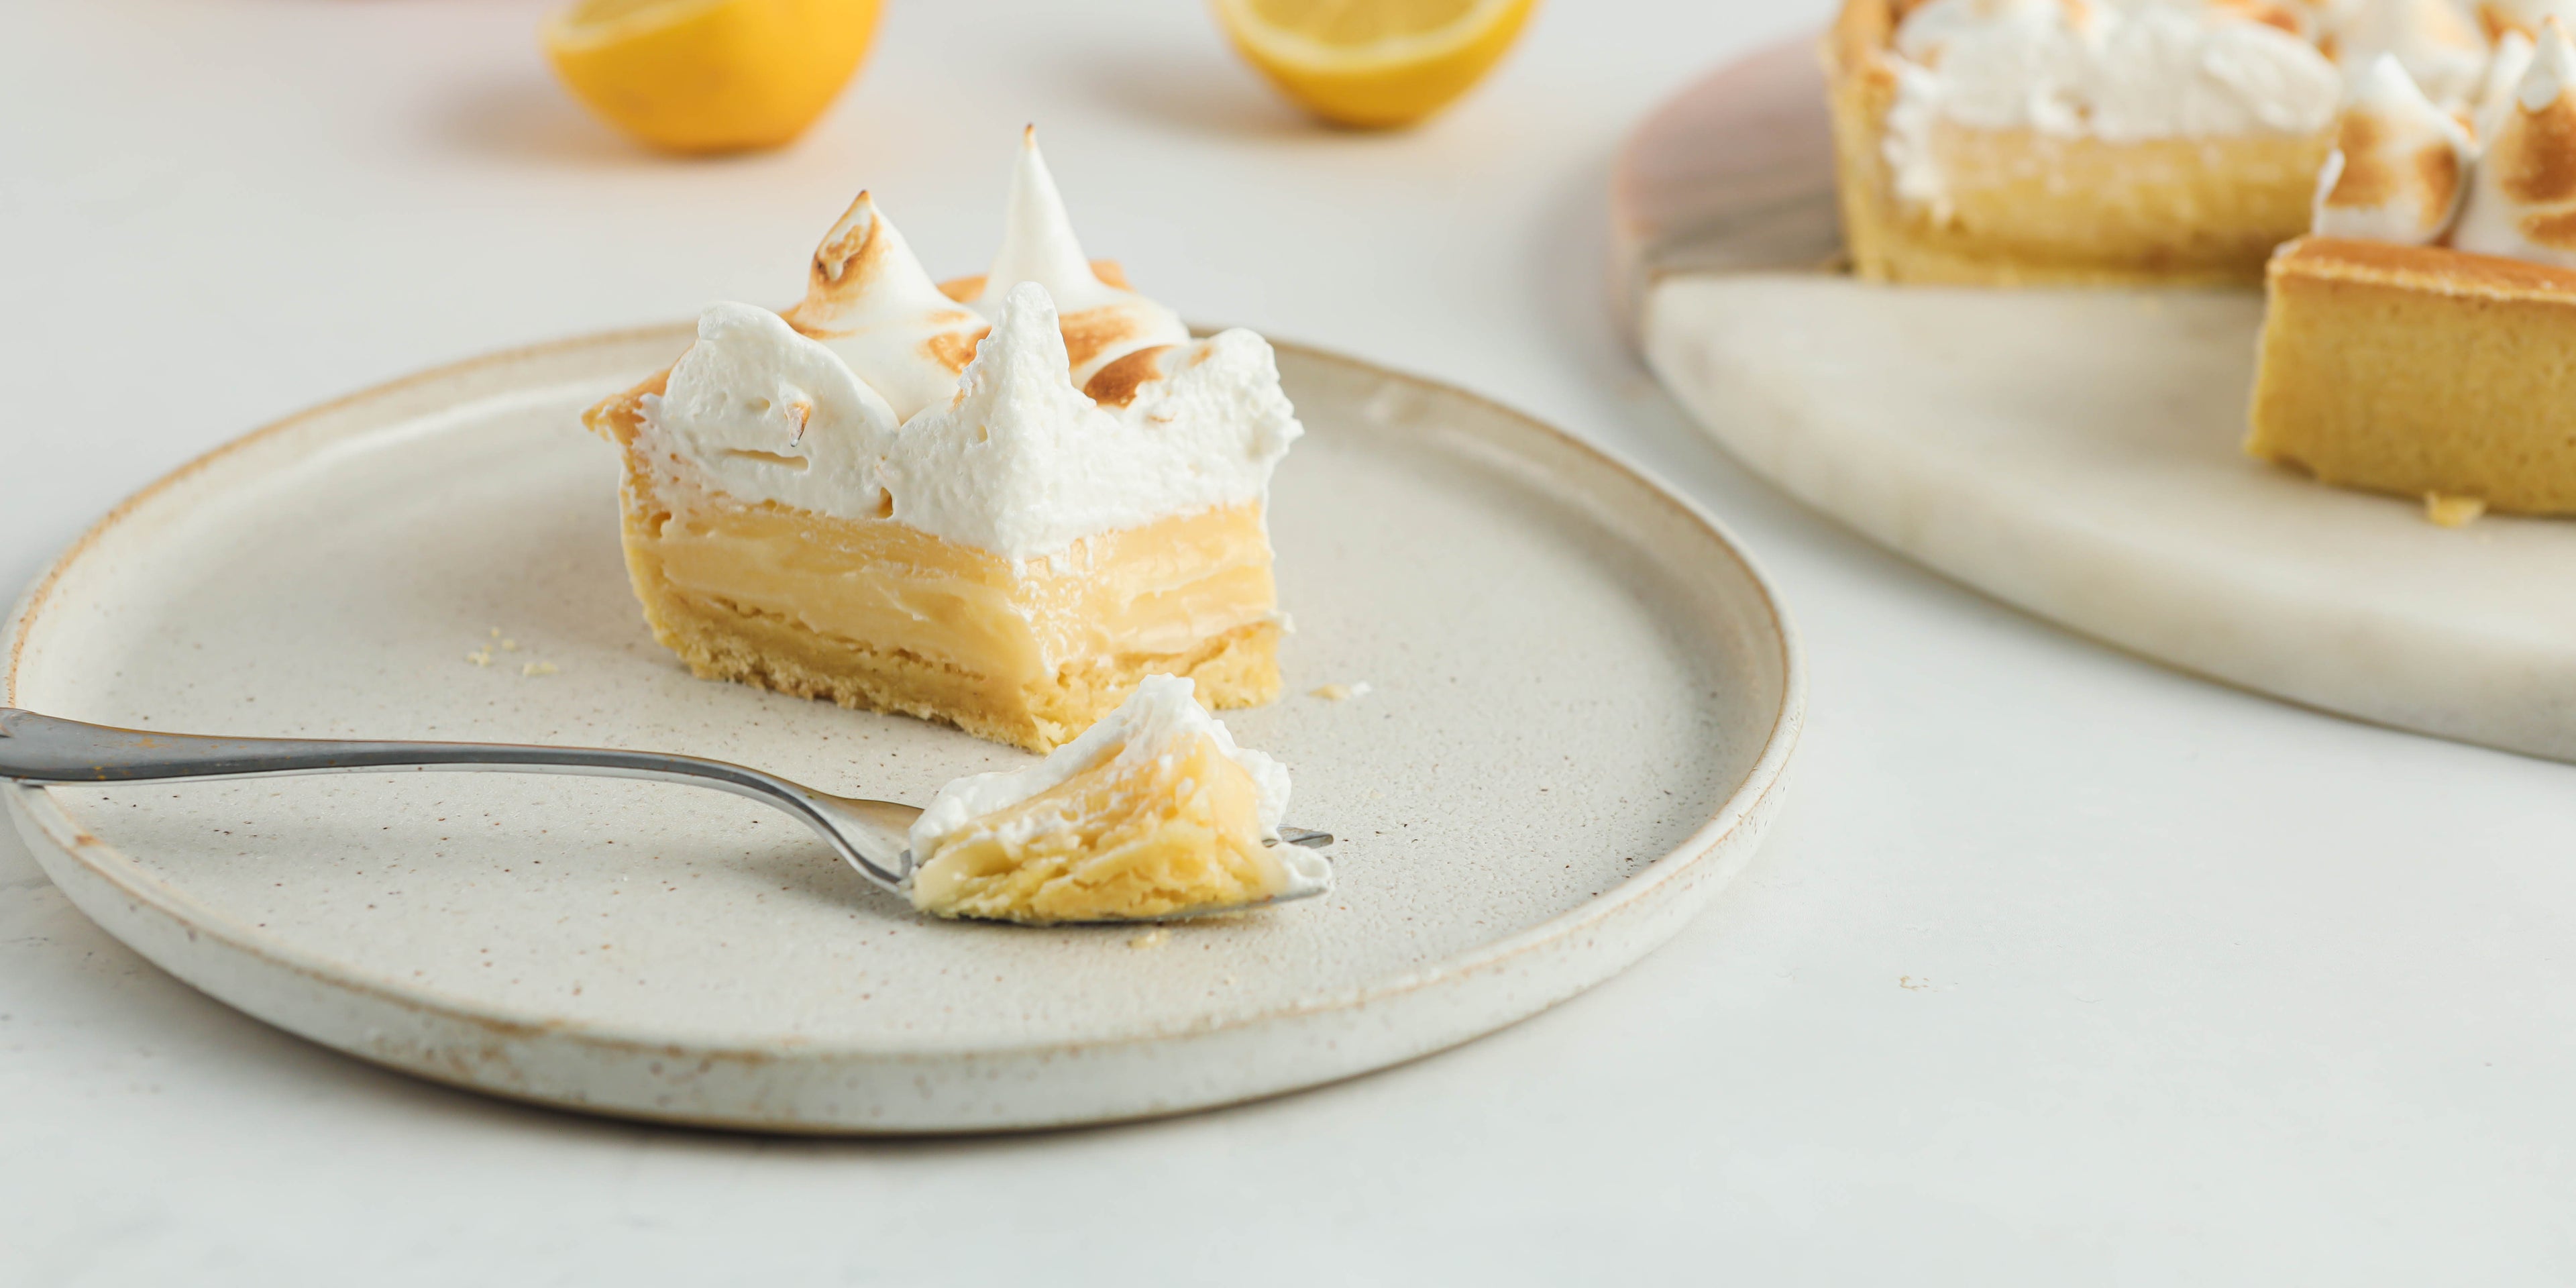 A slice of lemon meringue pie on a white plate with a forkful of pie infront. The remaining pie is in the background on a white plate with some spare lemons beside it.